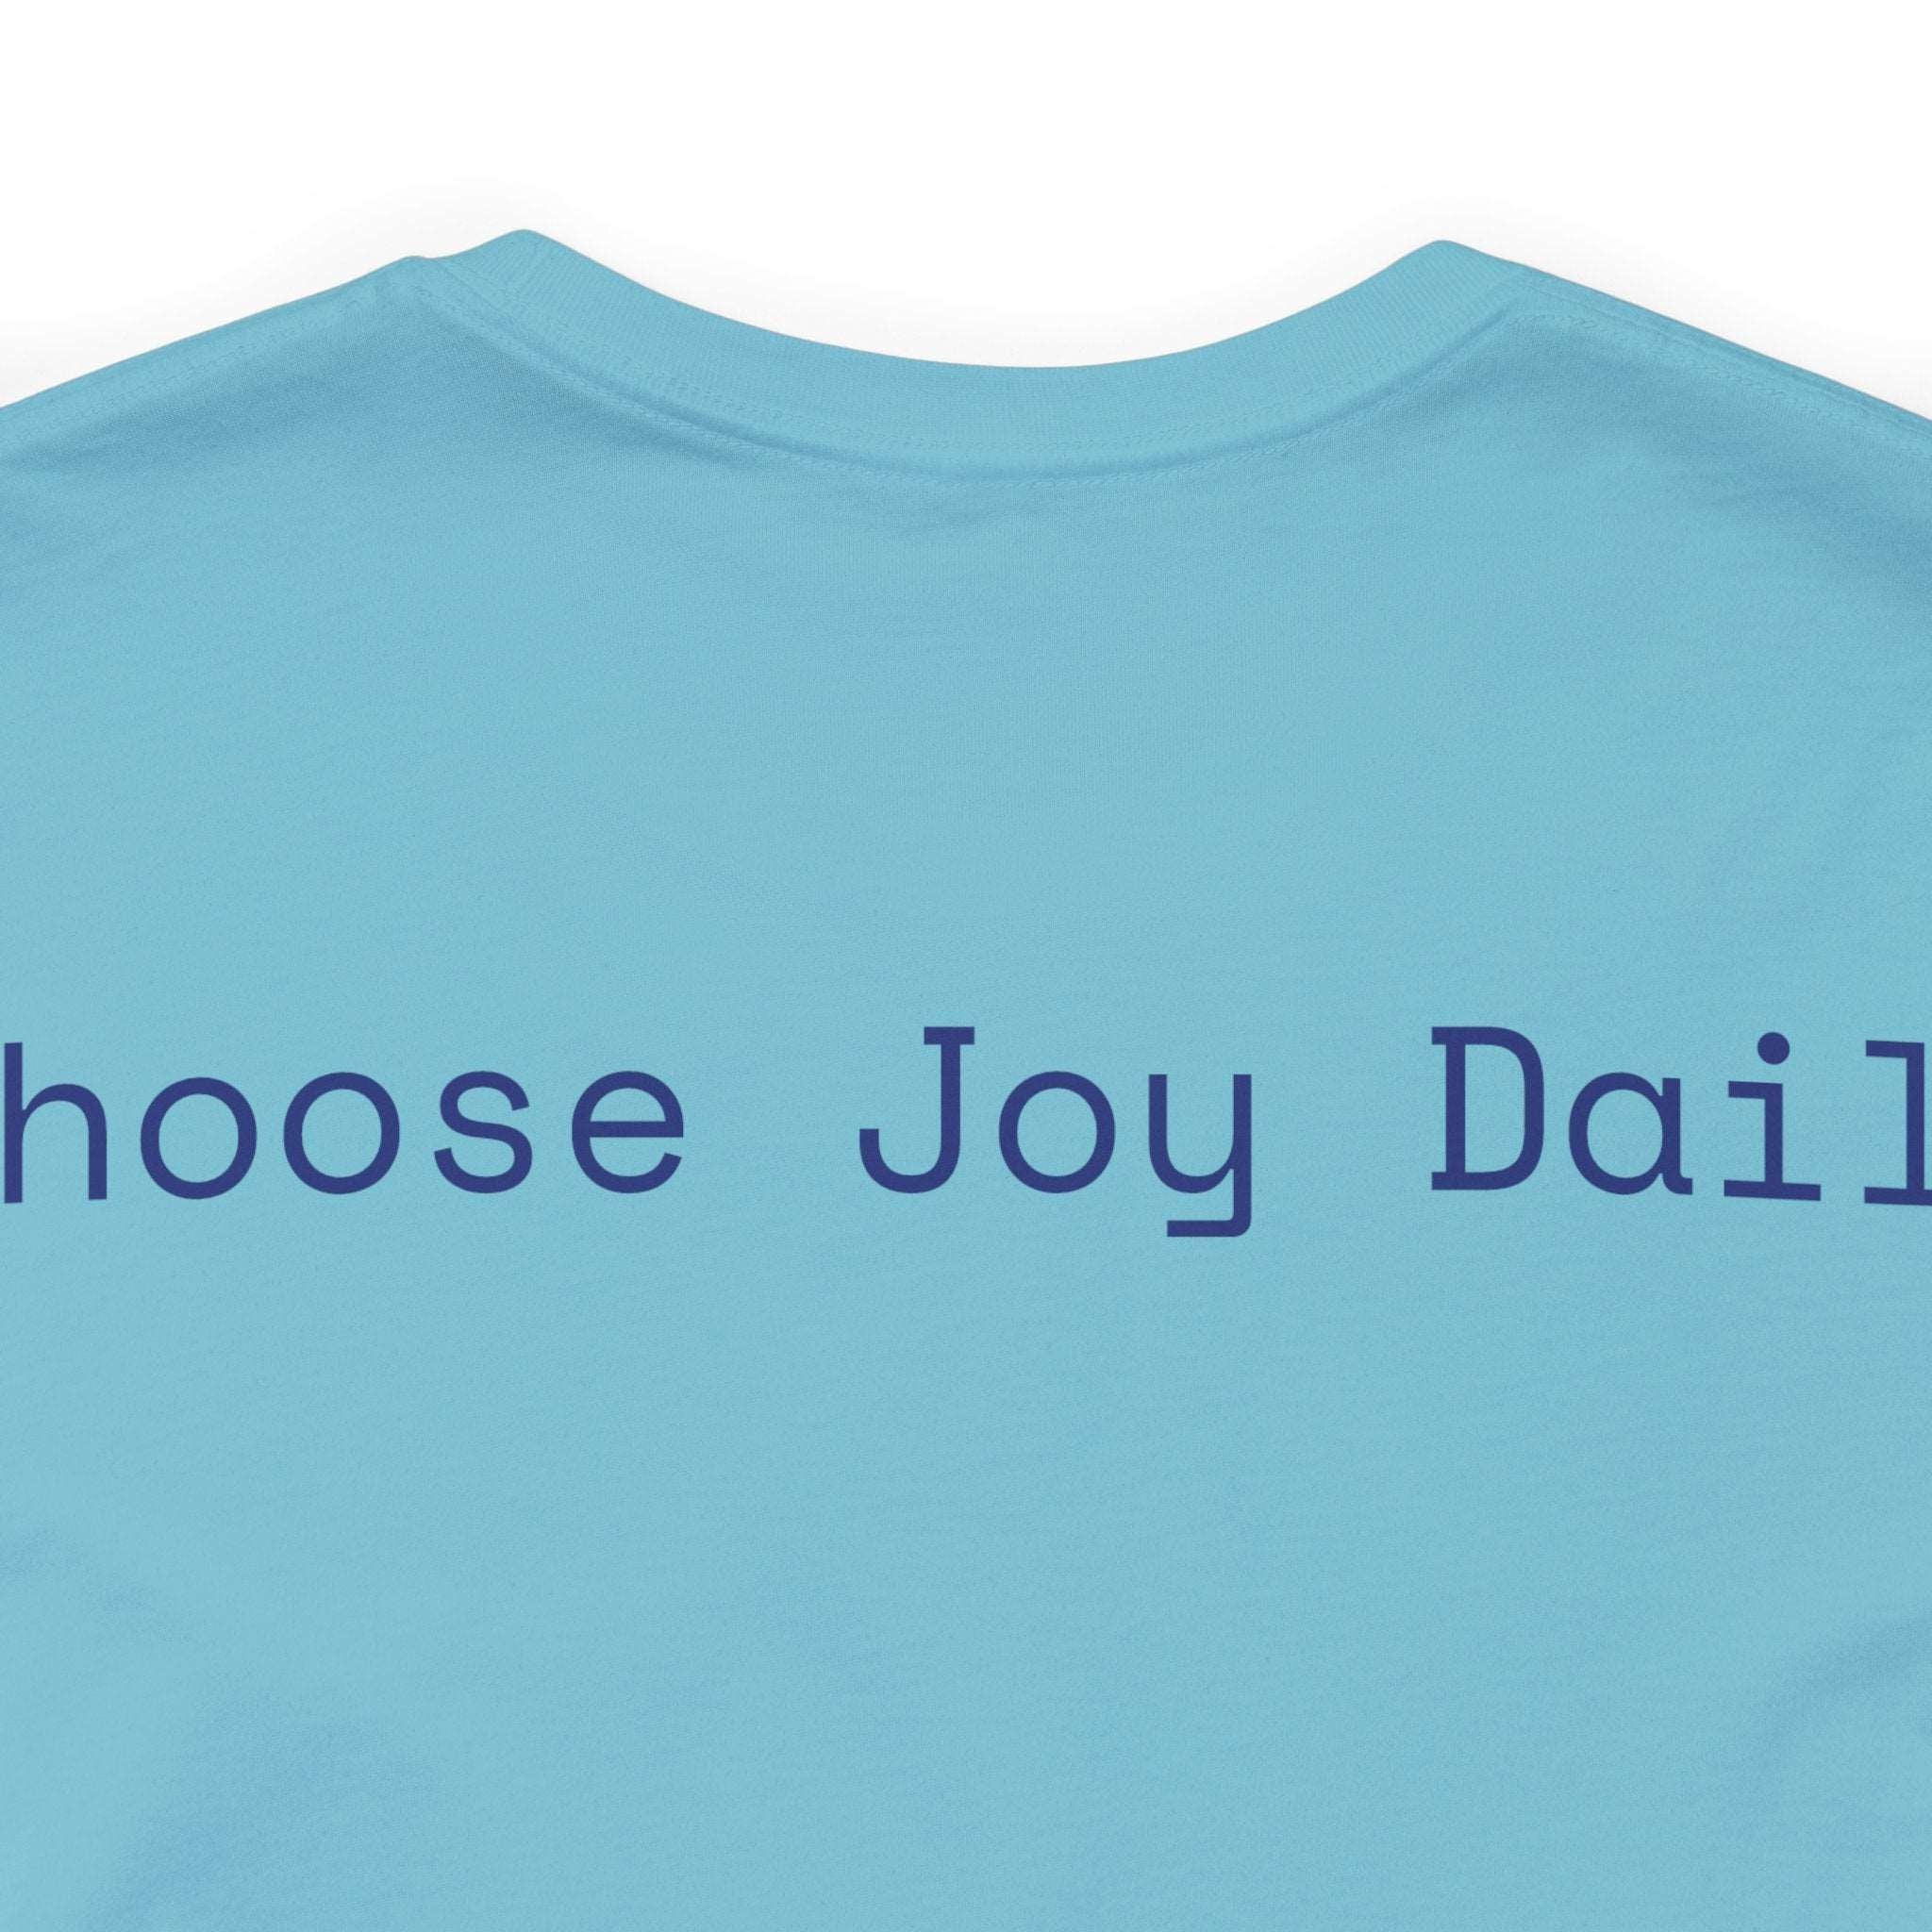 Choose Joy Daily Jersey Tee - Bella+Canvas 3001 Heather Mauve Airlume Cotton Bella+Canvas 3001 Crew Neckline Jersey Short Sleeve Lightweight Fabric Mental Health Support Retail Fit Tear-away Label Tee Unisex Tee T-Shirt 10300592528551926985_2048_2b27cd5b-f601-4f7d-9573-7fb55bf8c61f Printify